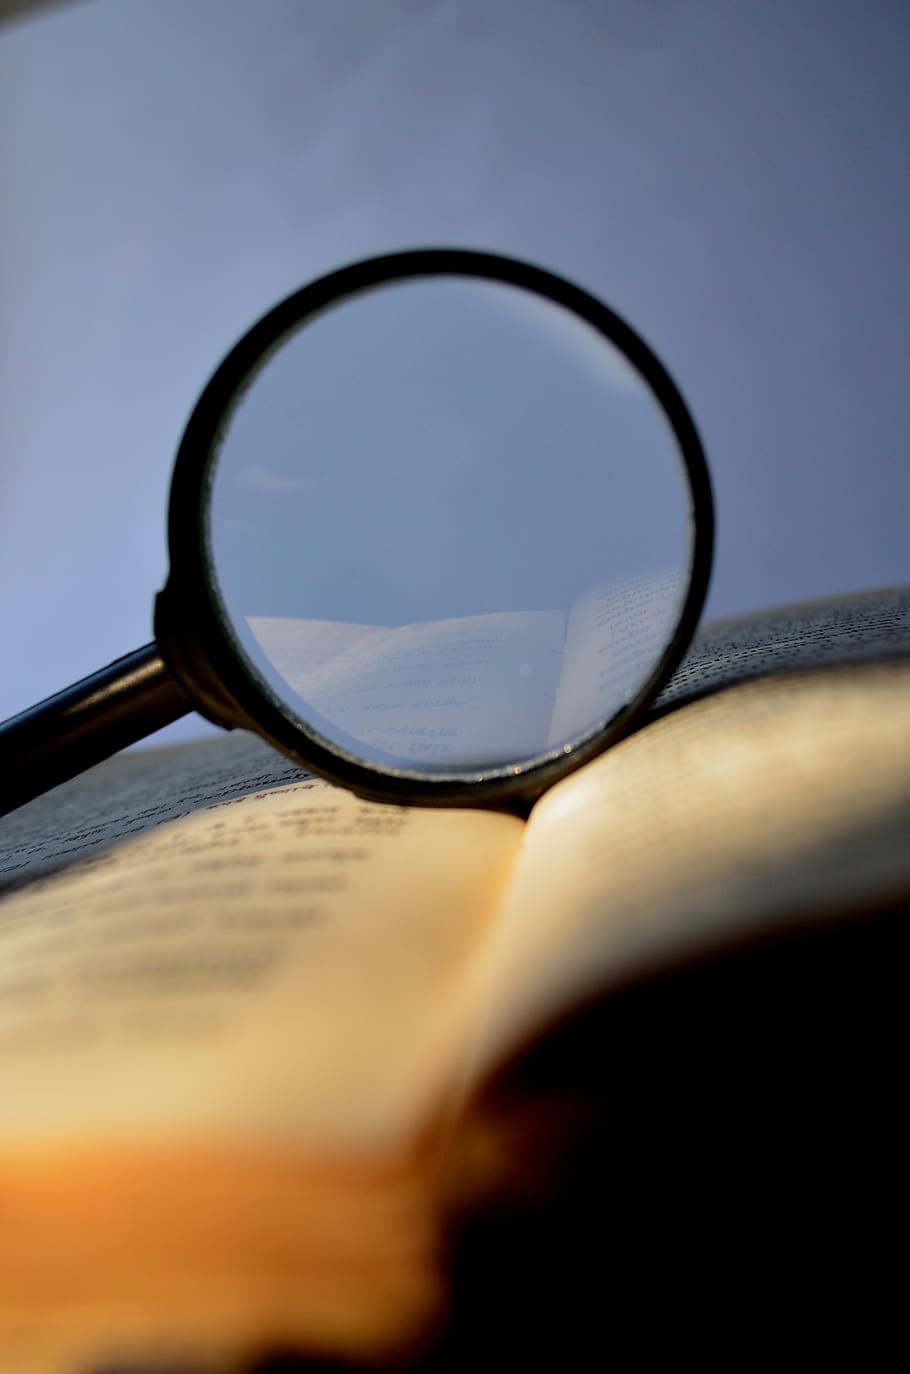 magnifier, magnifying glass, loupe, book, dictionary, lookup, search, reading, learning, find